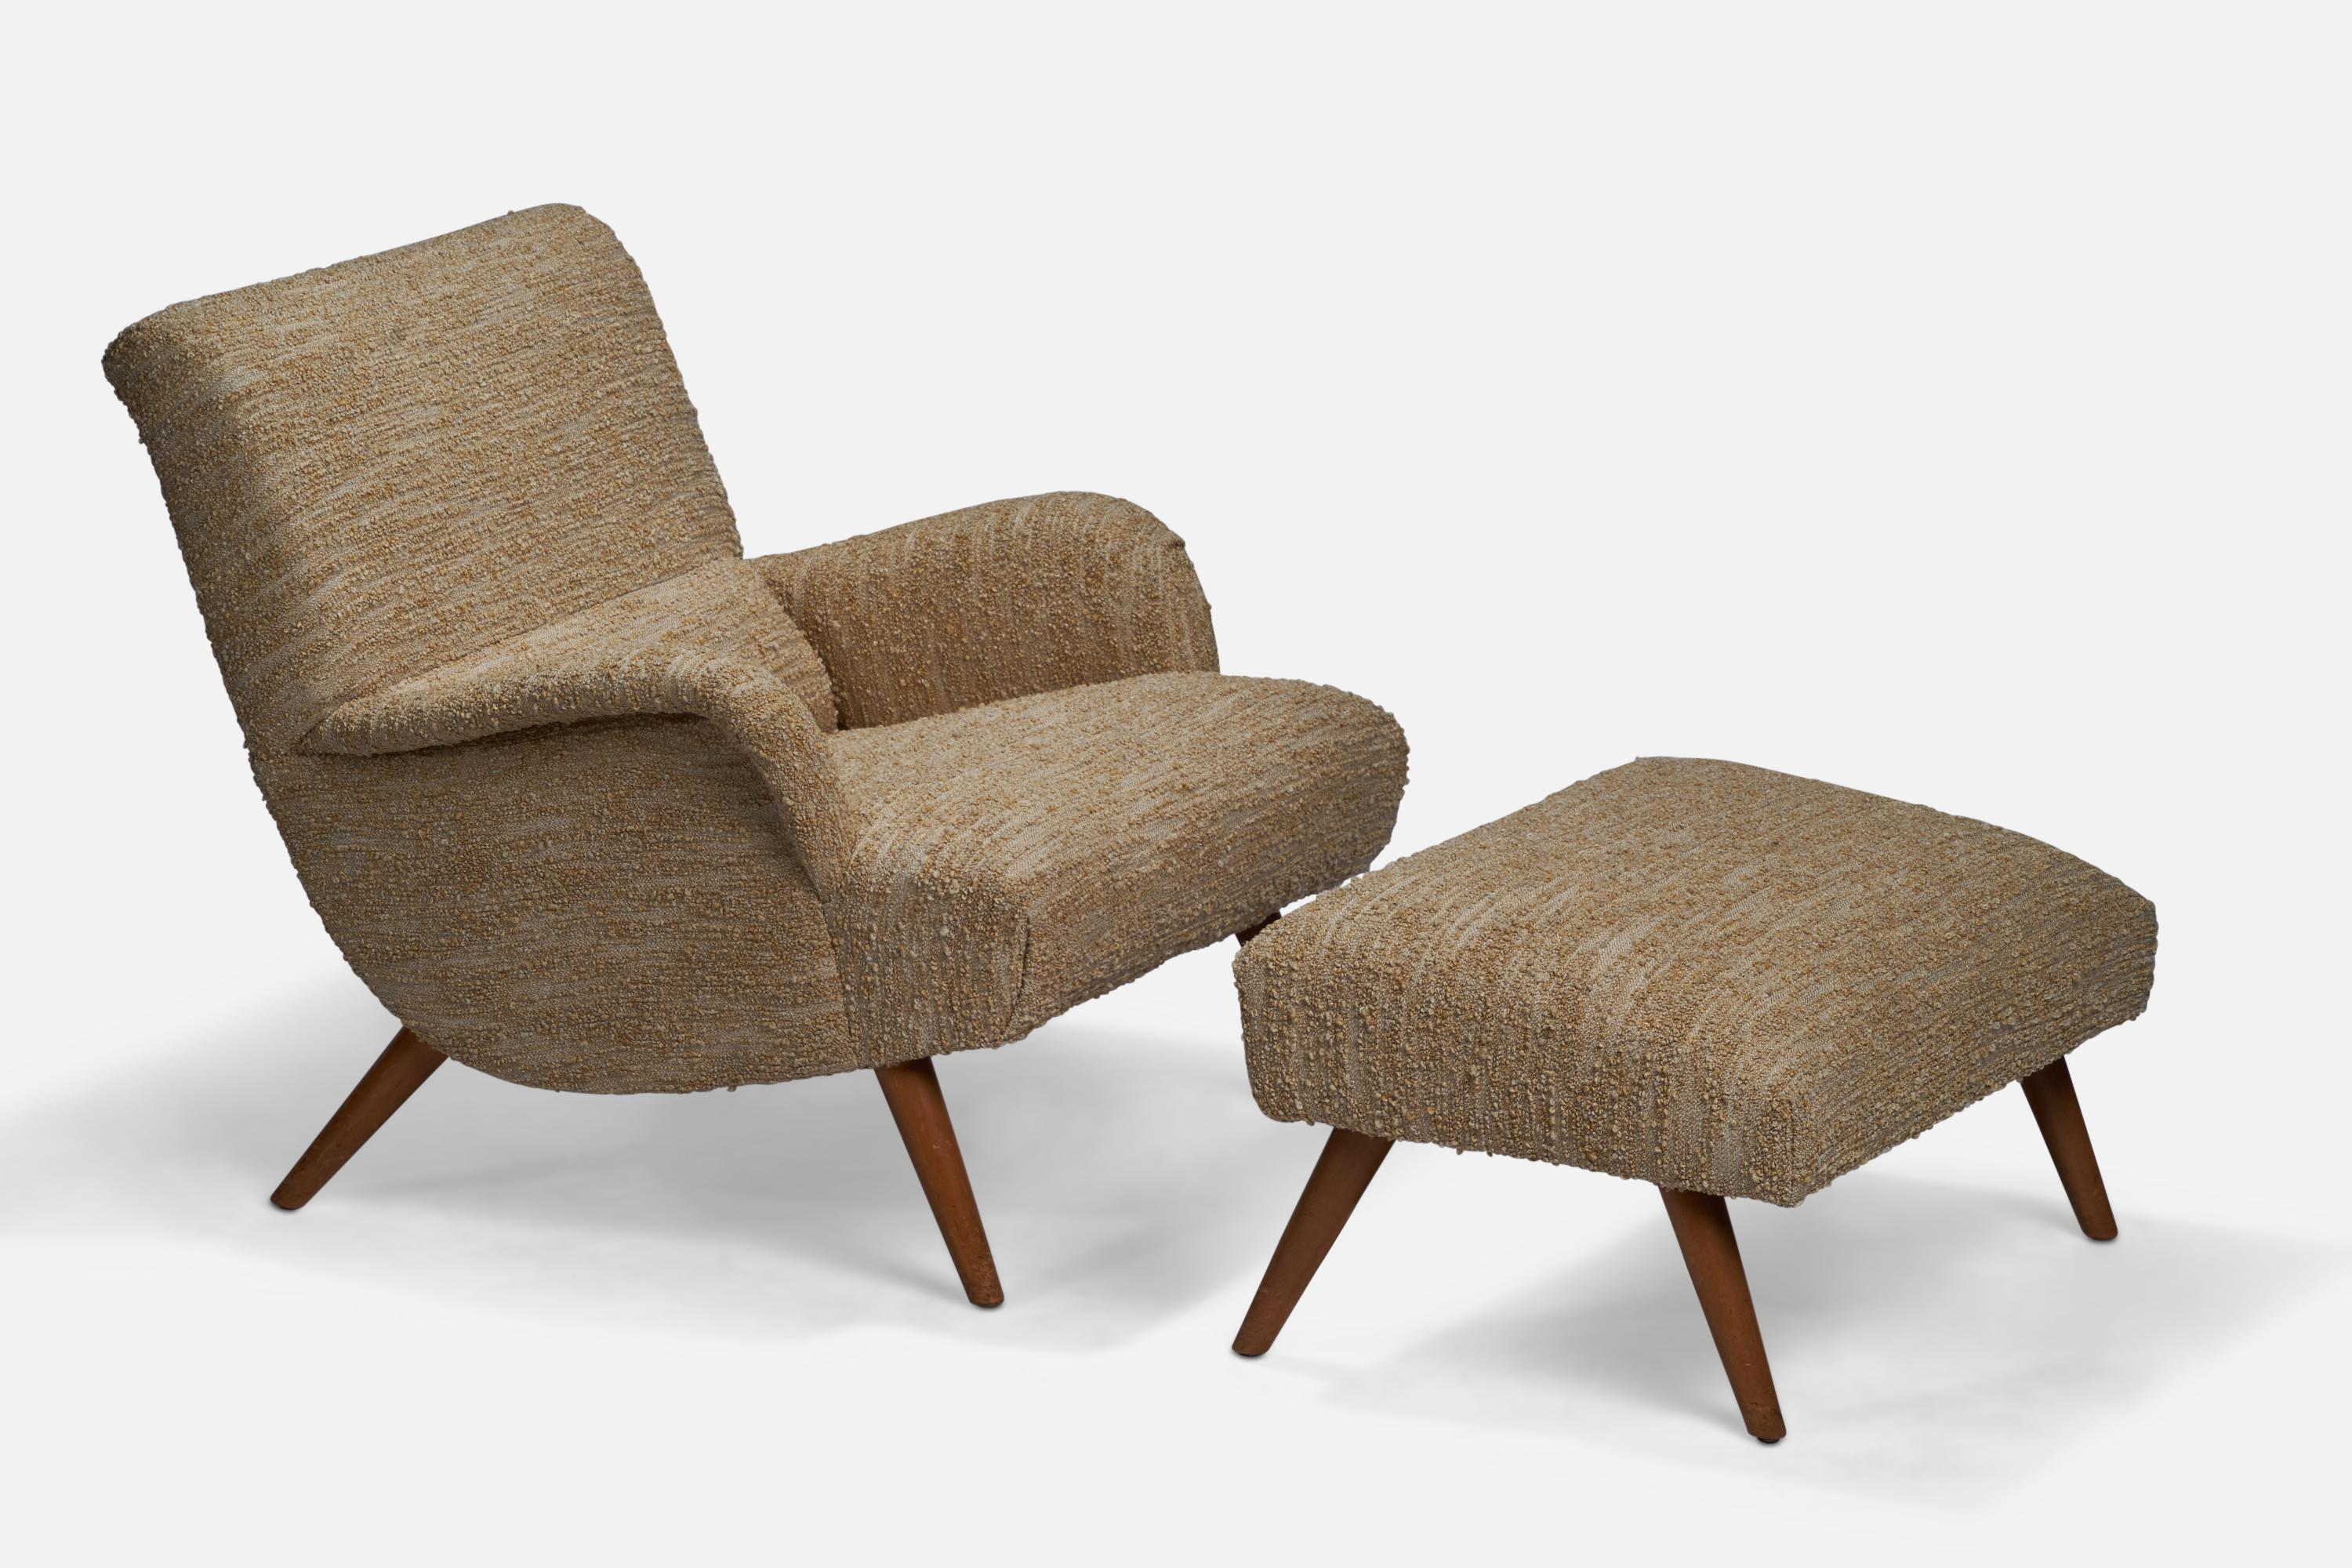 A wood and beige bouclé fabric lounge chair designed by Lawrence Peabody and produced by Selig, USA, 1950s.

Seat height: 15.45